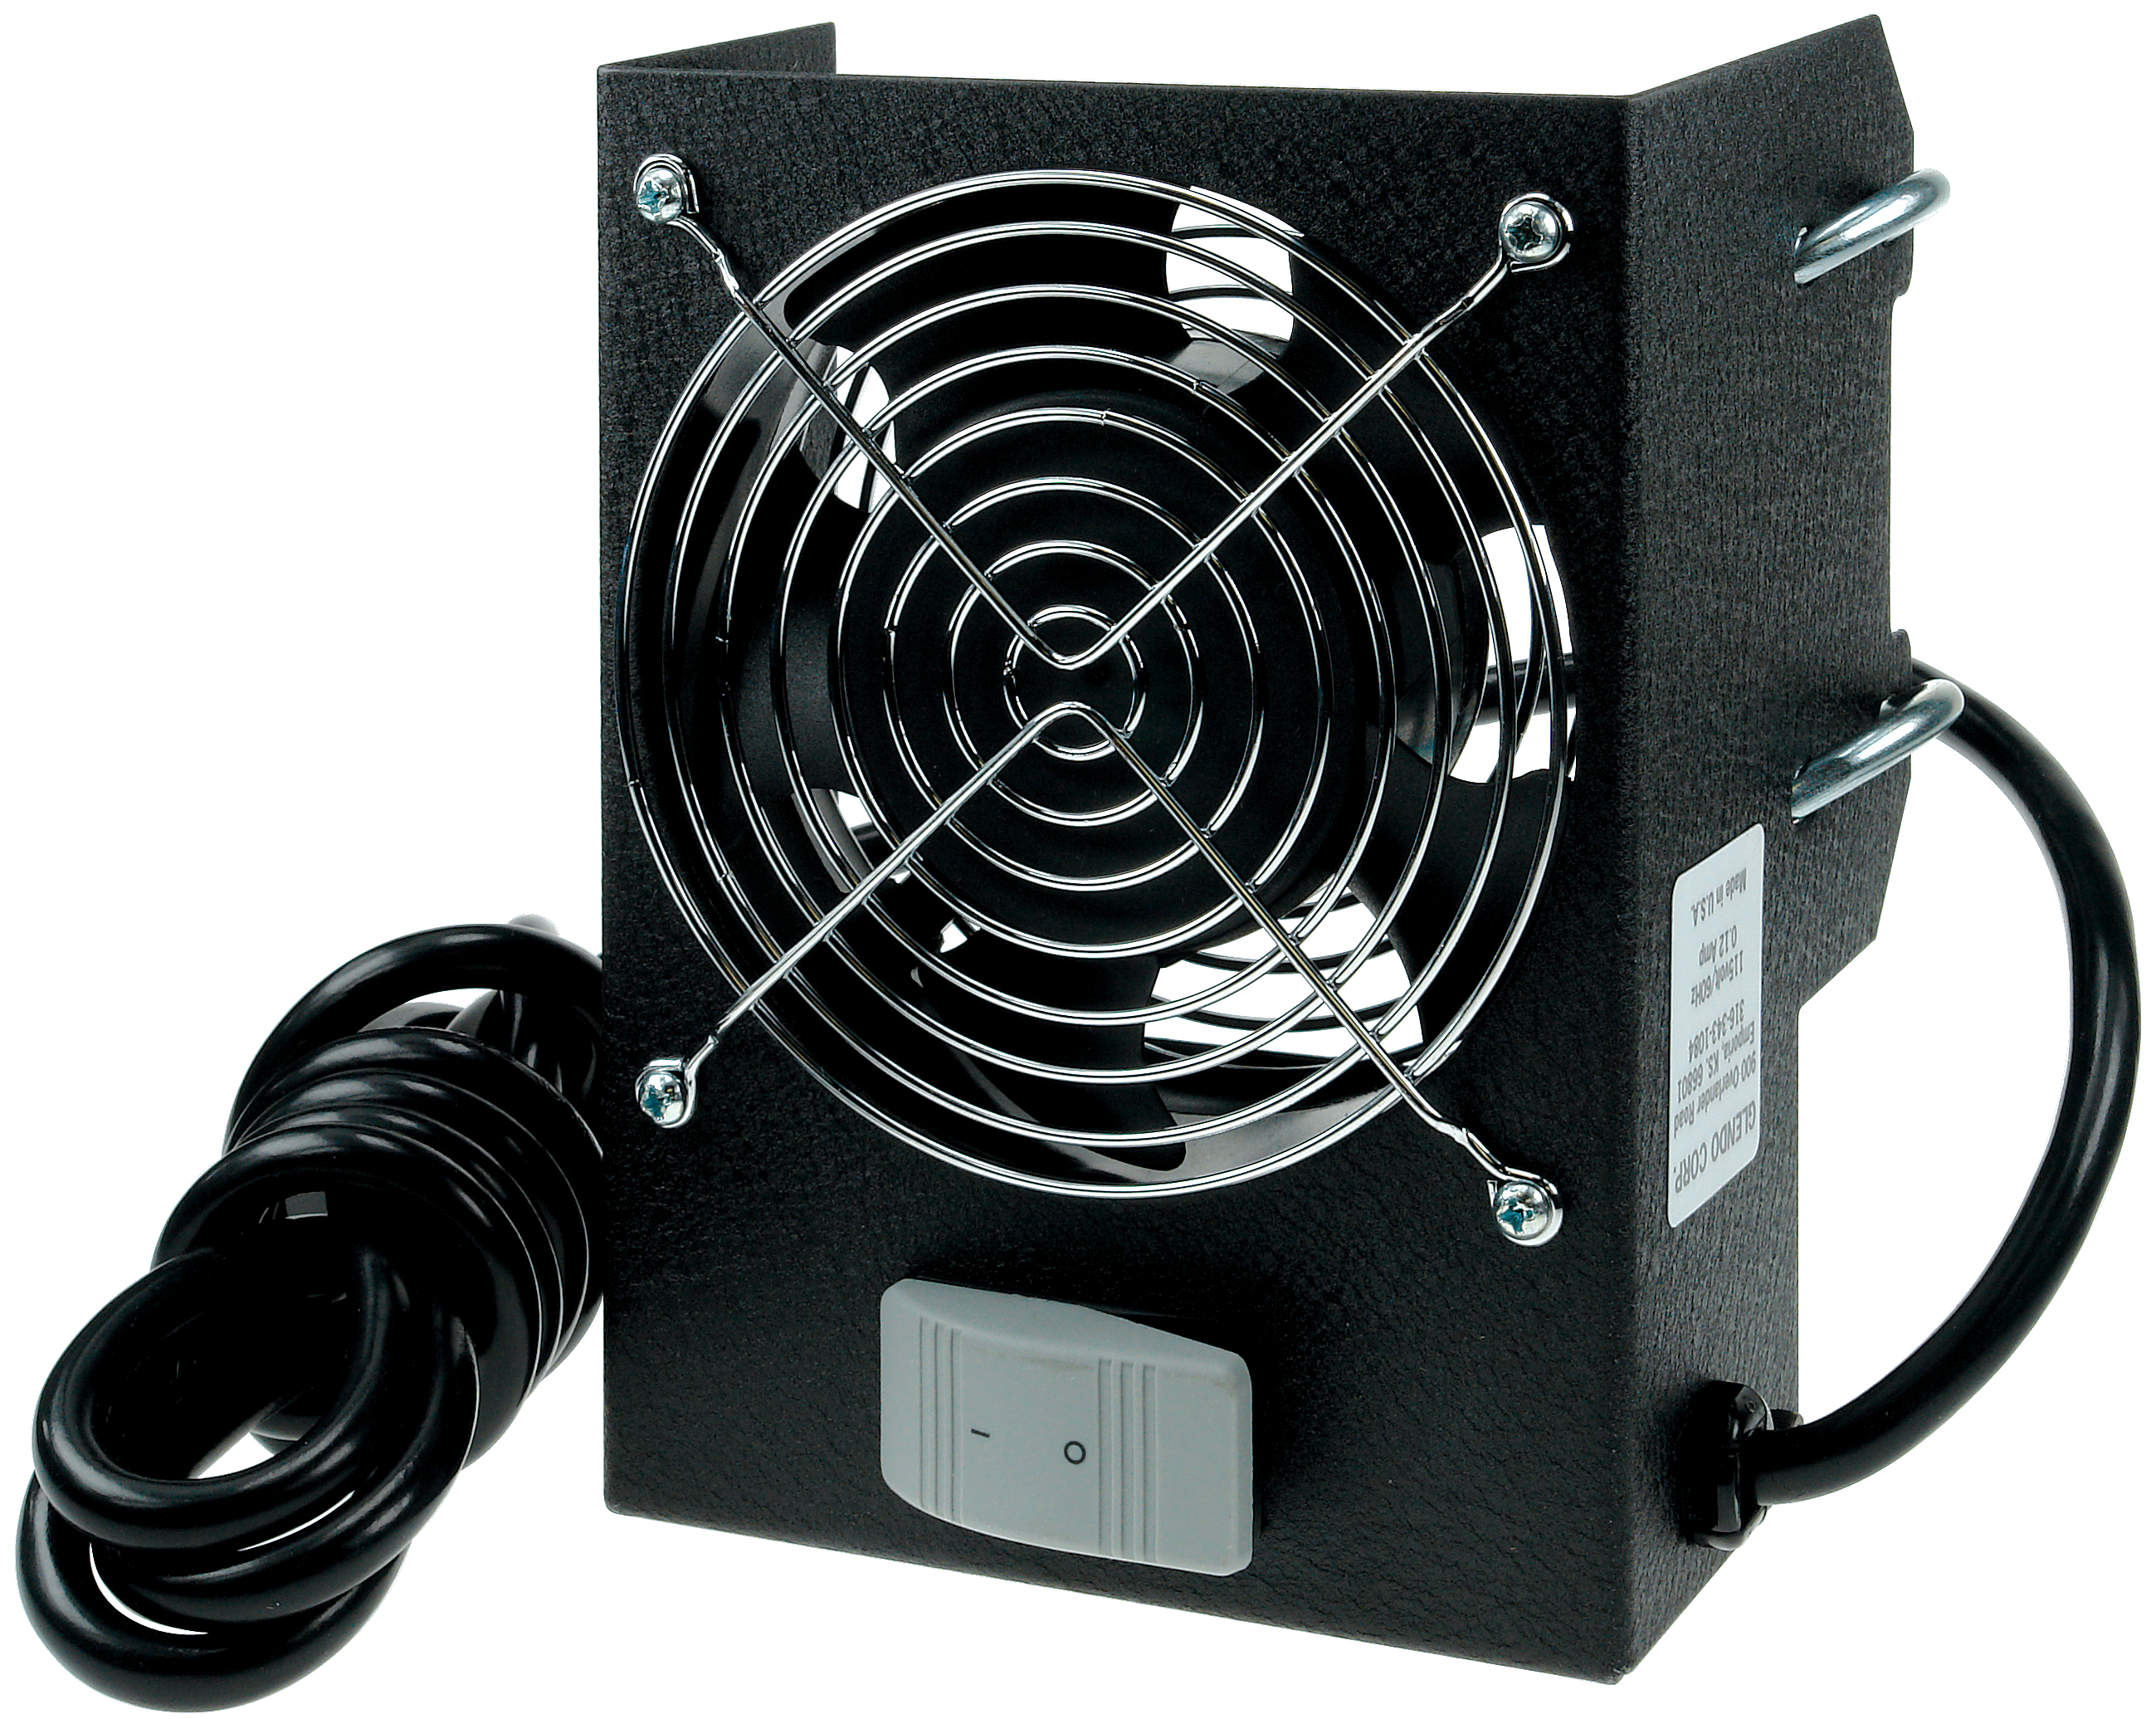 Additional cooling fan for GRS whispering compressors